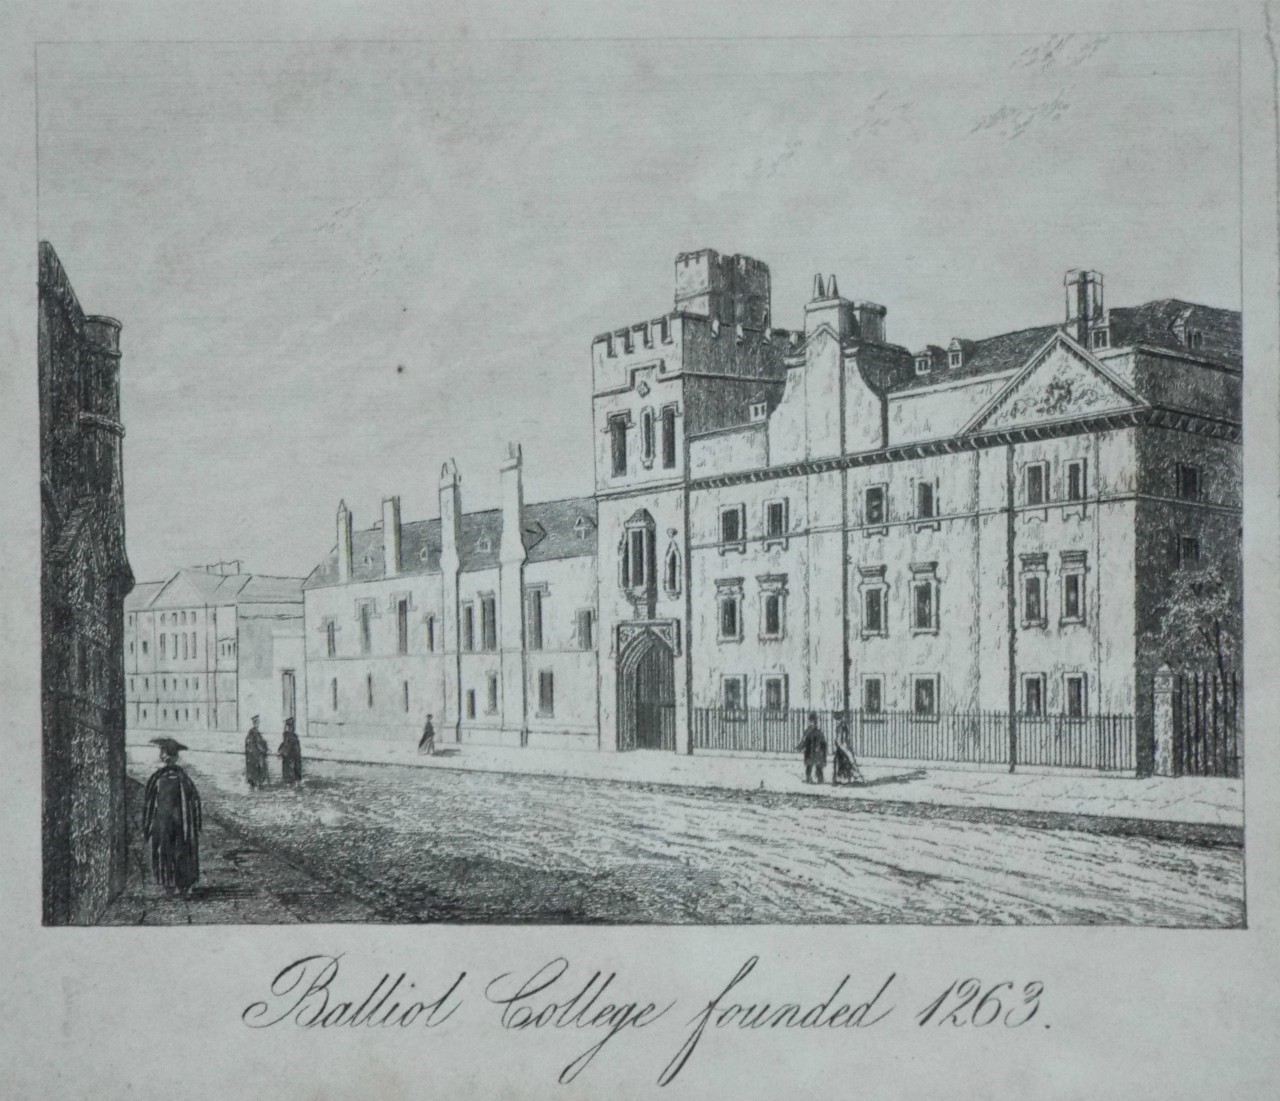 Print - Balliol College founded 1623.